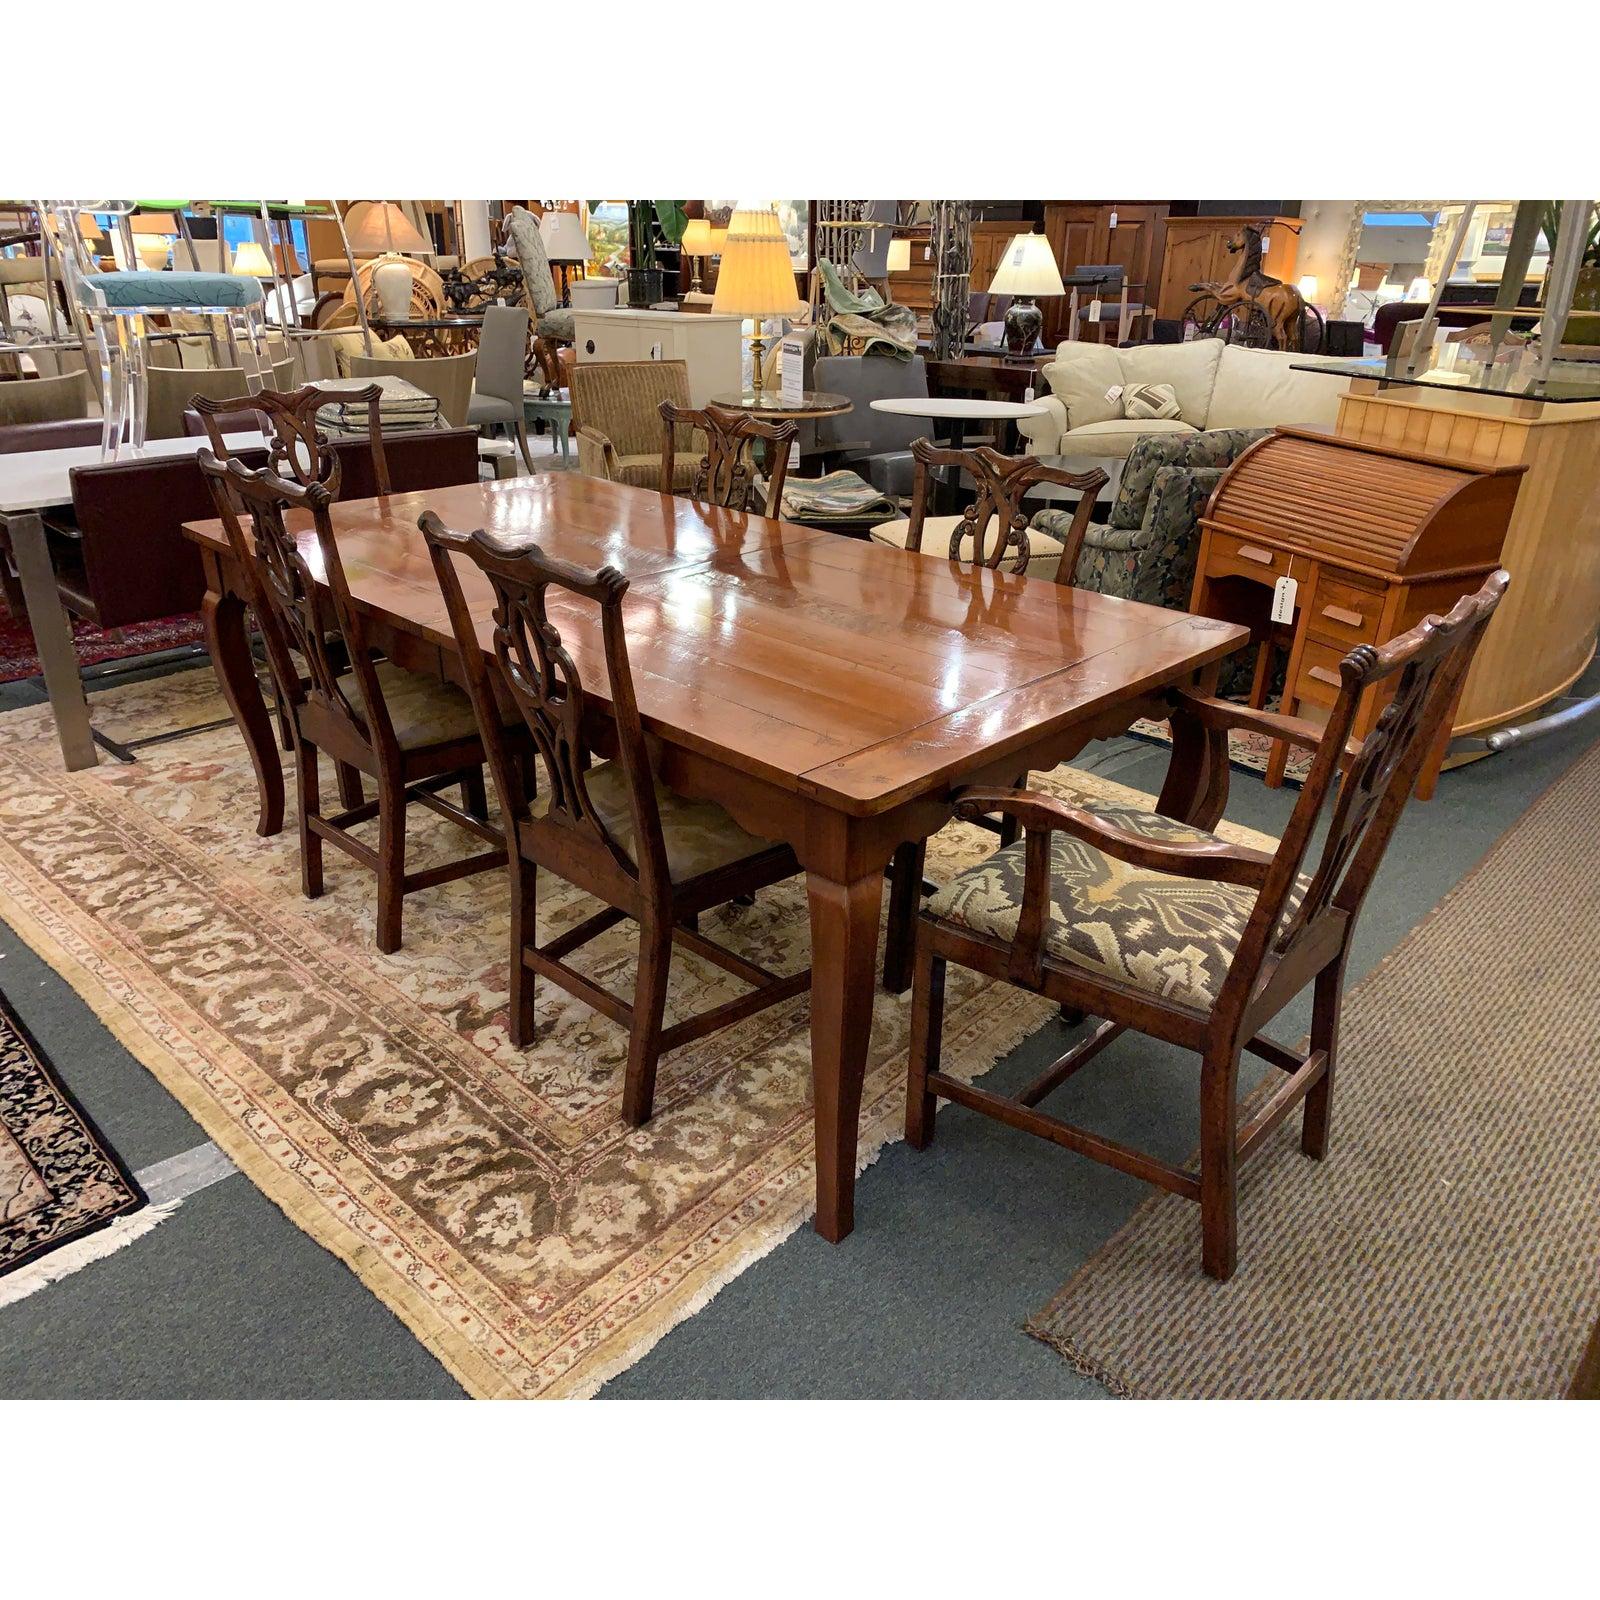 Presents a Wright Furniture Company extension table and Chippendale style chair dining set. Table is hand made in North Carolina with dovetail, mortise and tenon joinery. Sloped legs elegantly flow into scalloped apron underneath polished top.